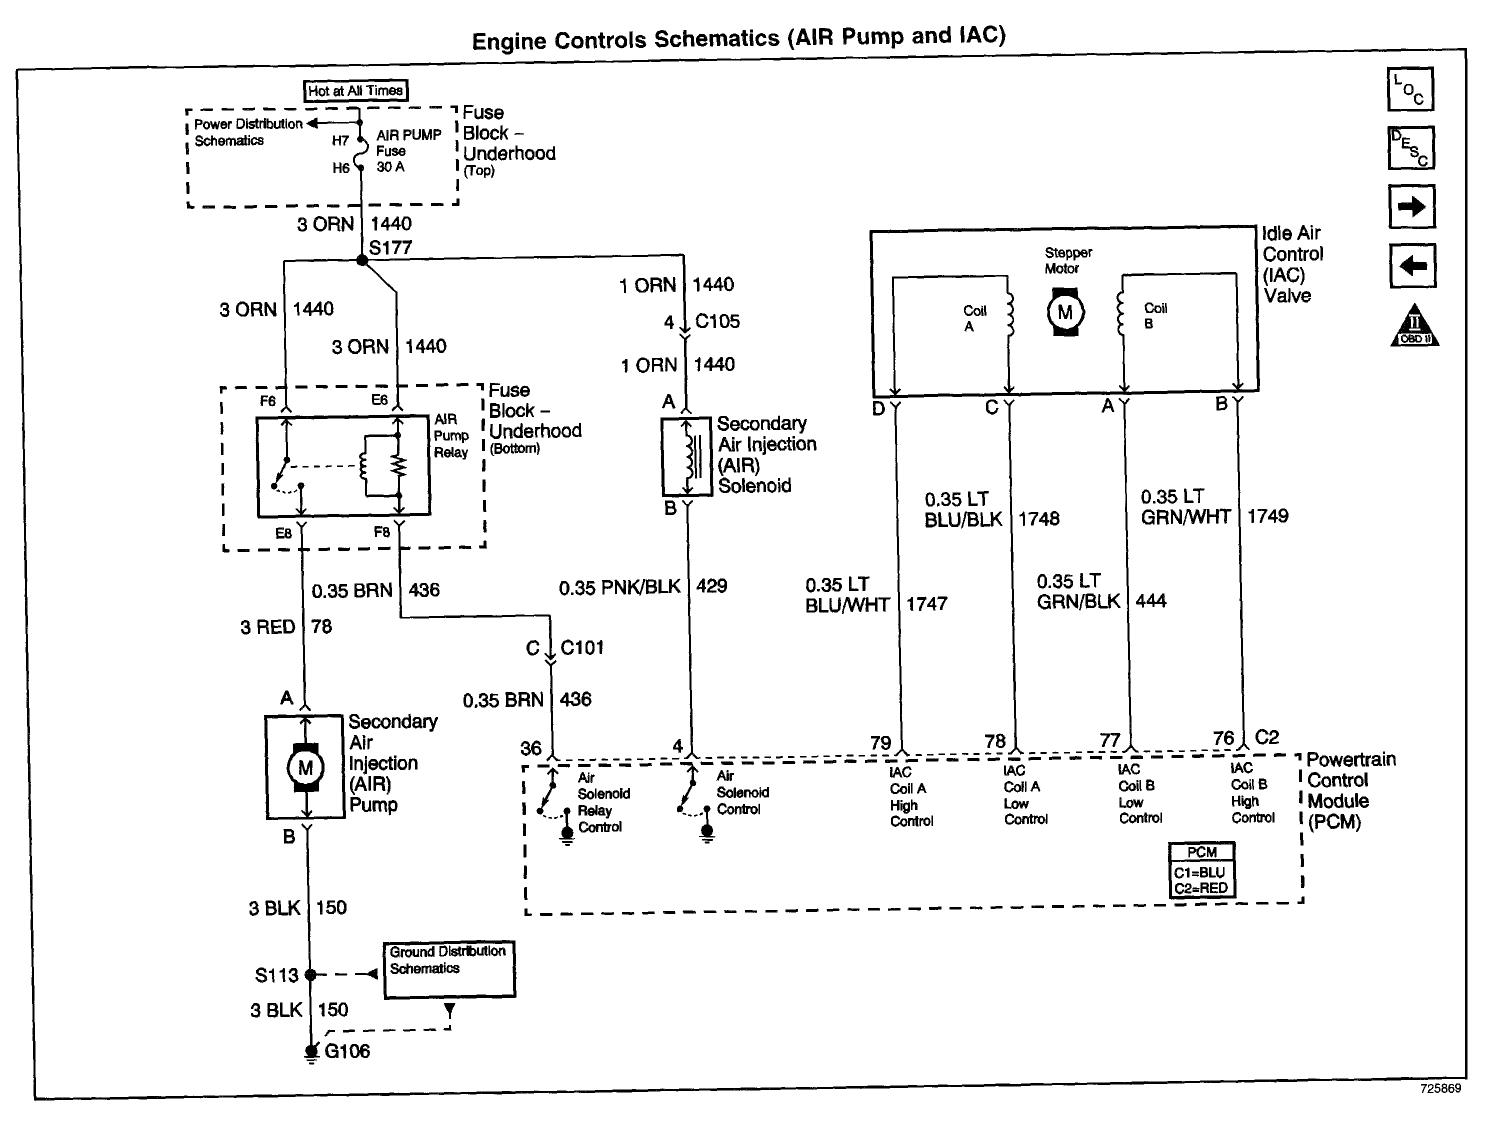 1999 camaro pcm pinout issue - LS1TECH - Camaro and ... jeep cj7 ignition wiring 